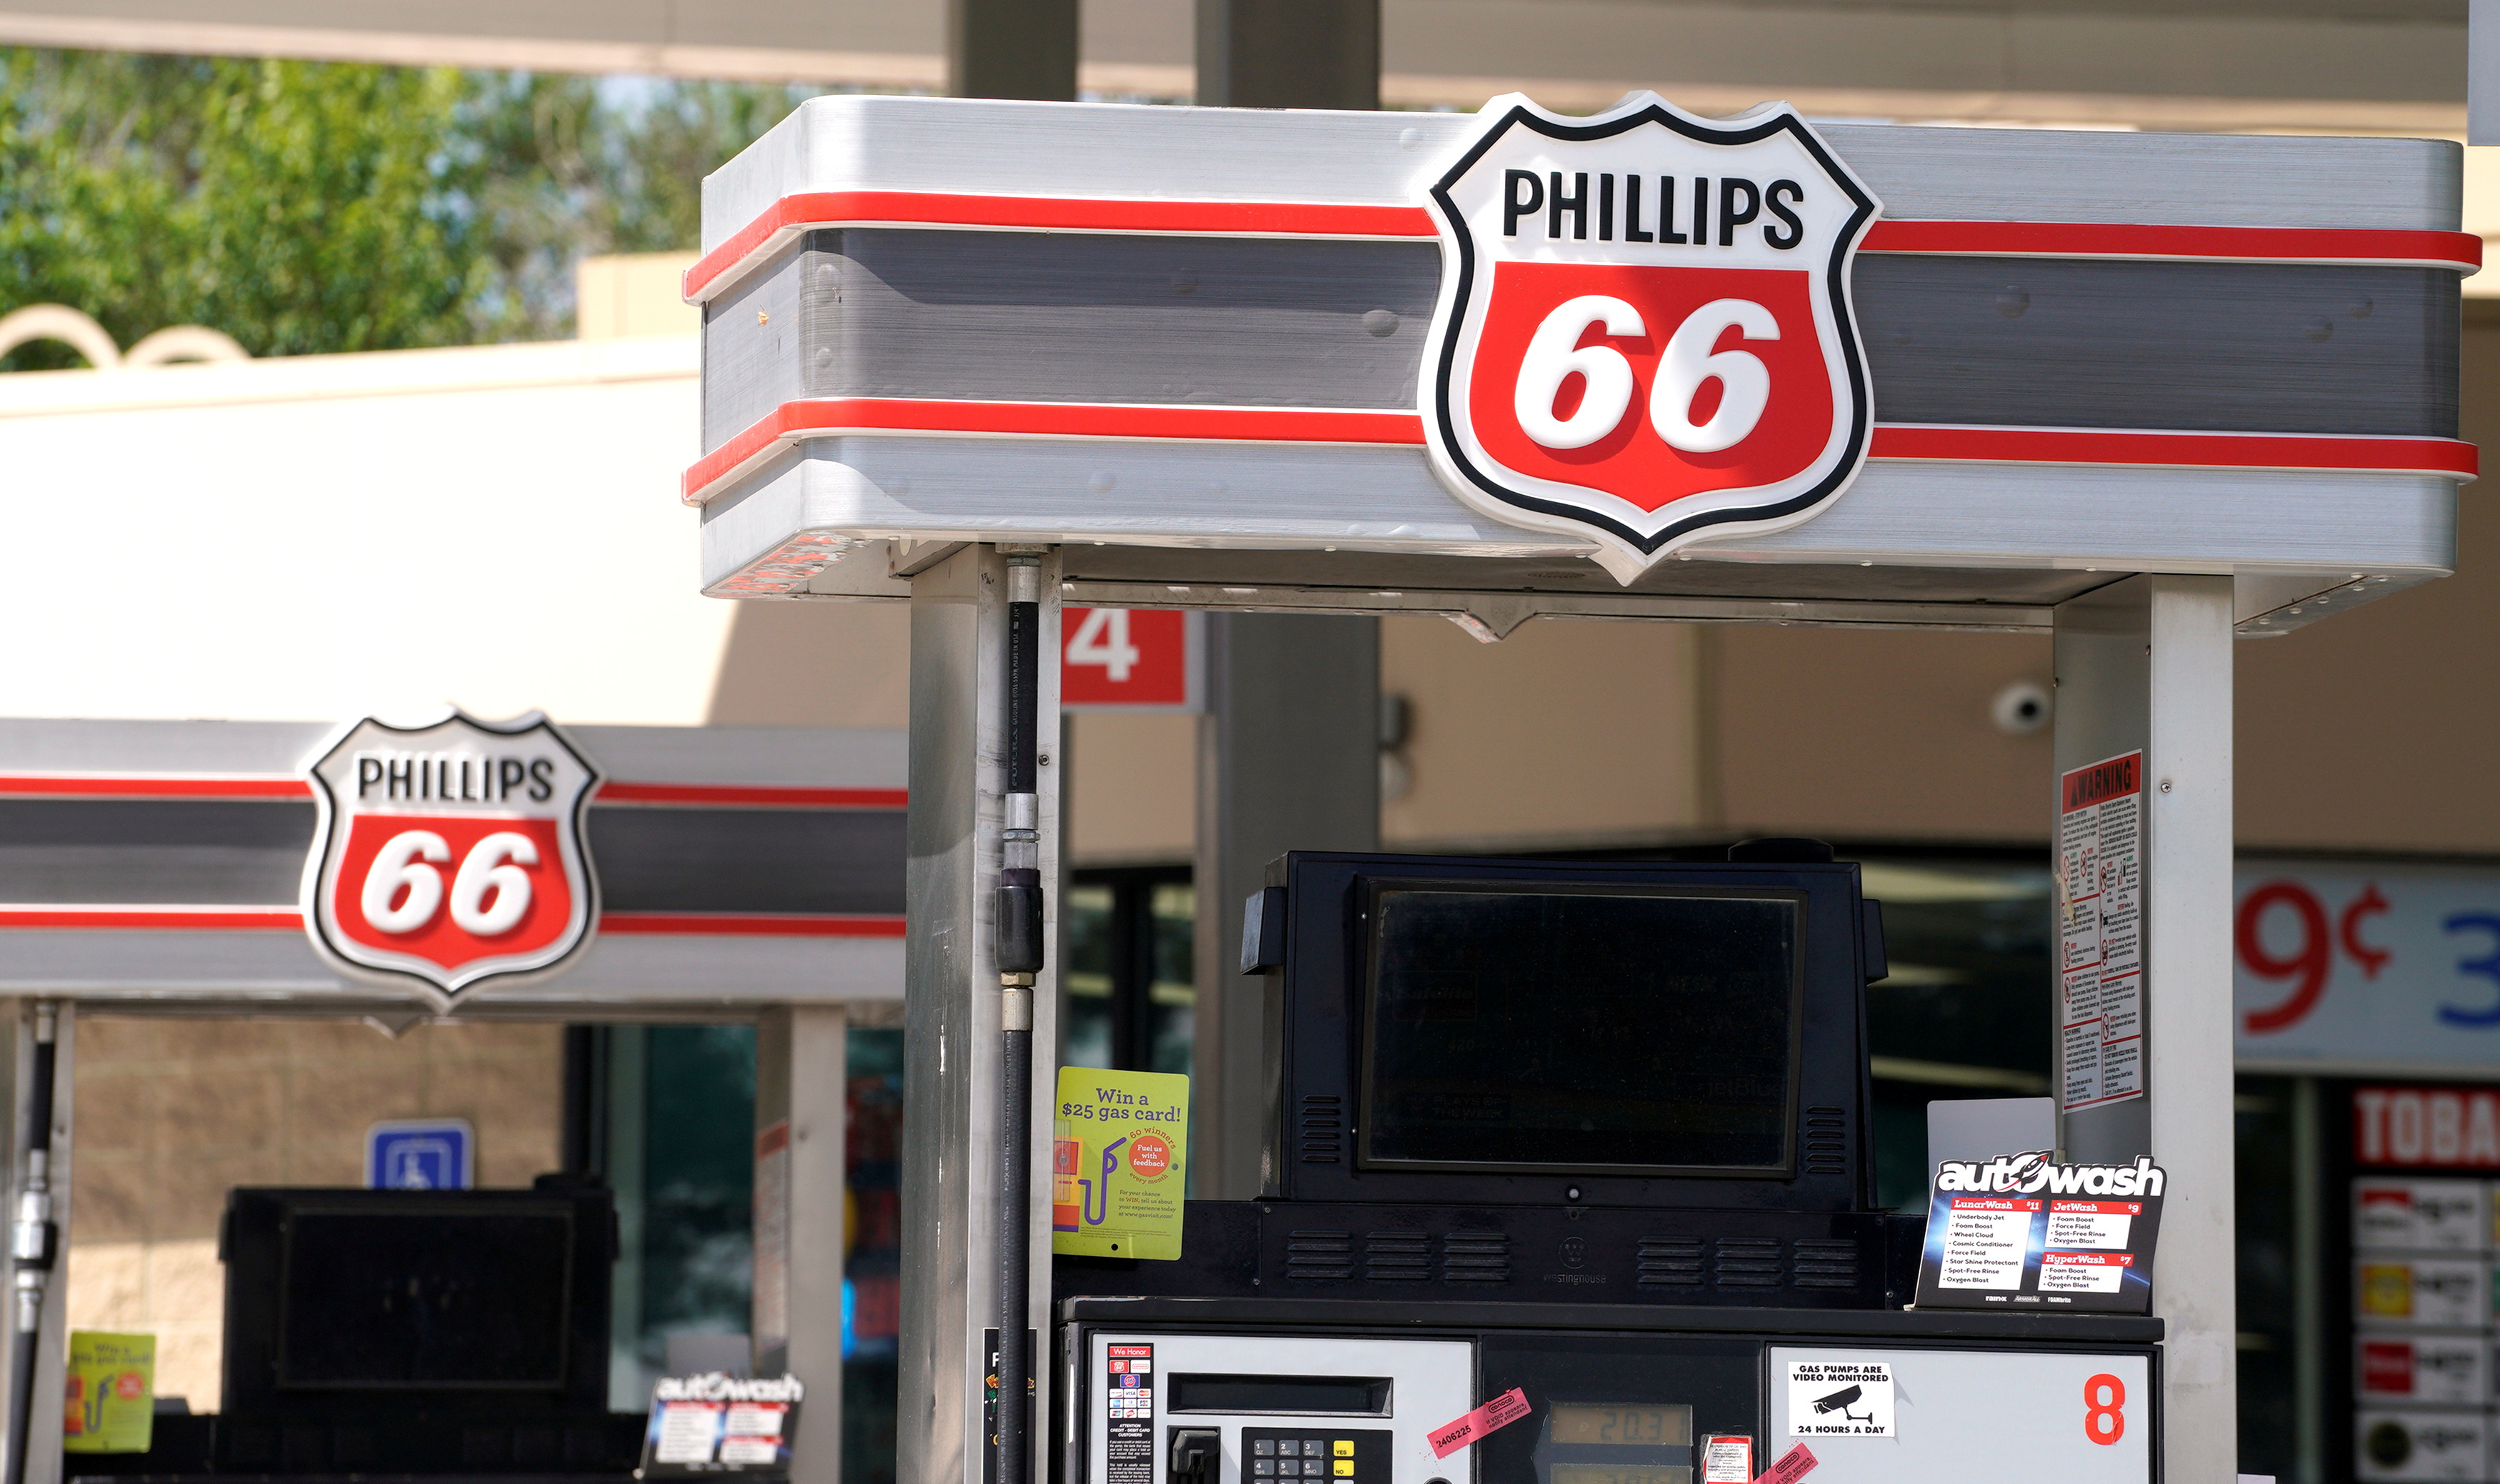 Phillips 66 refinery sale offers test of future for motor fuel suppliers | Reuters